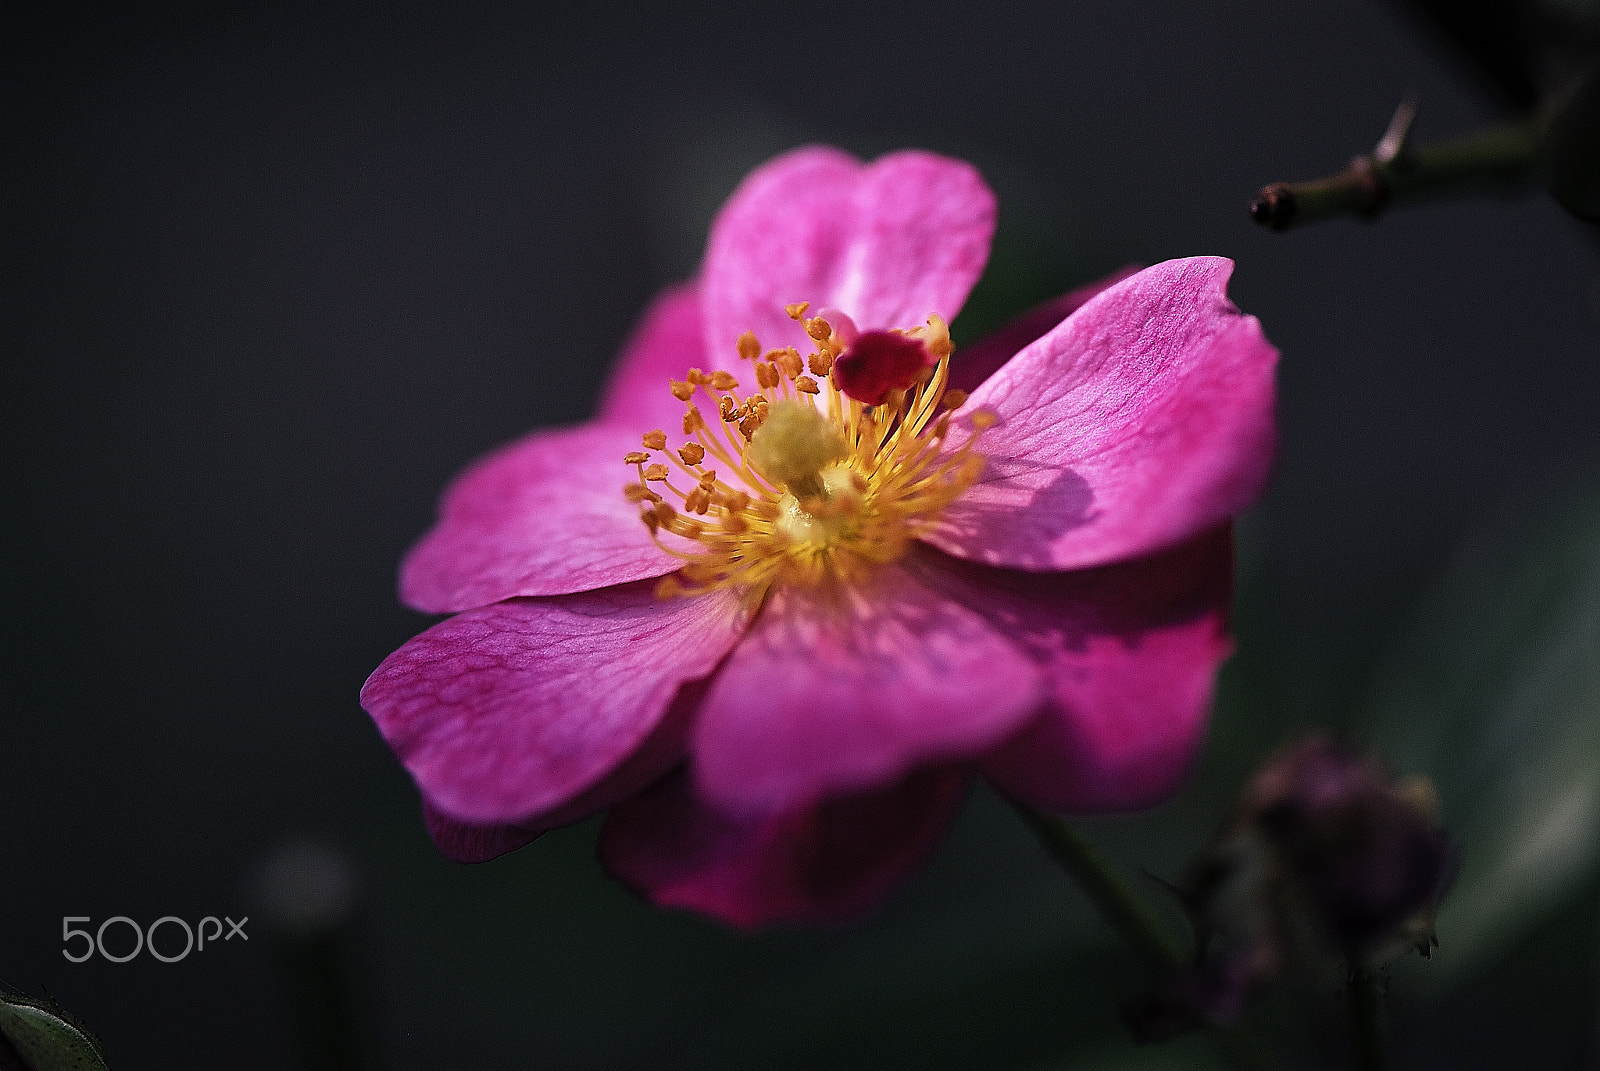 Nikon D200 sample photo. Winter rose of the primitive species photography